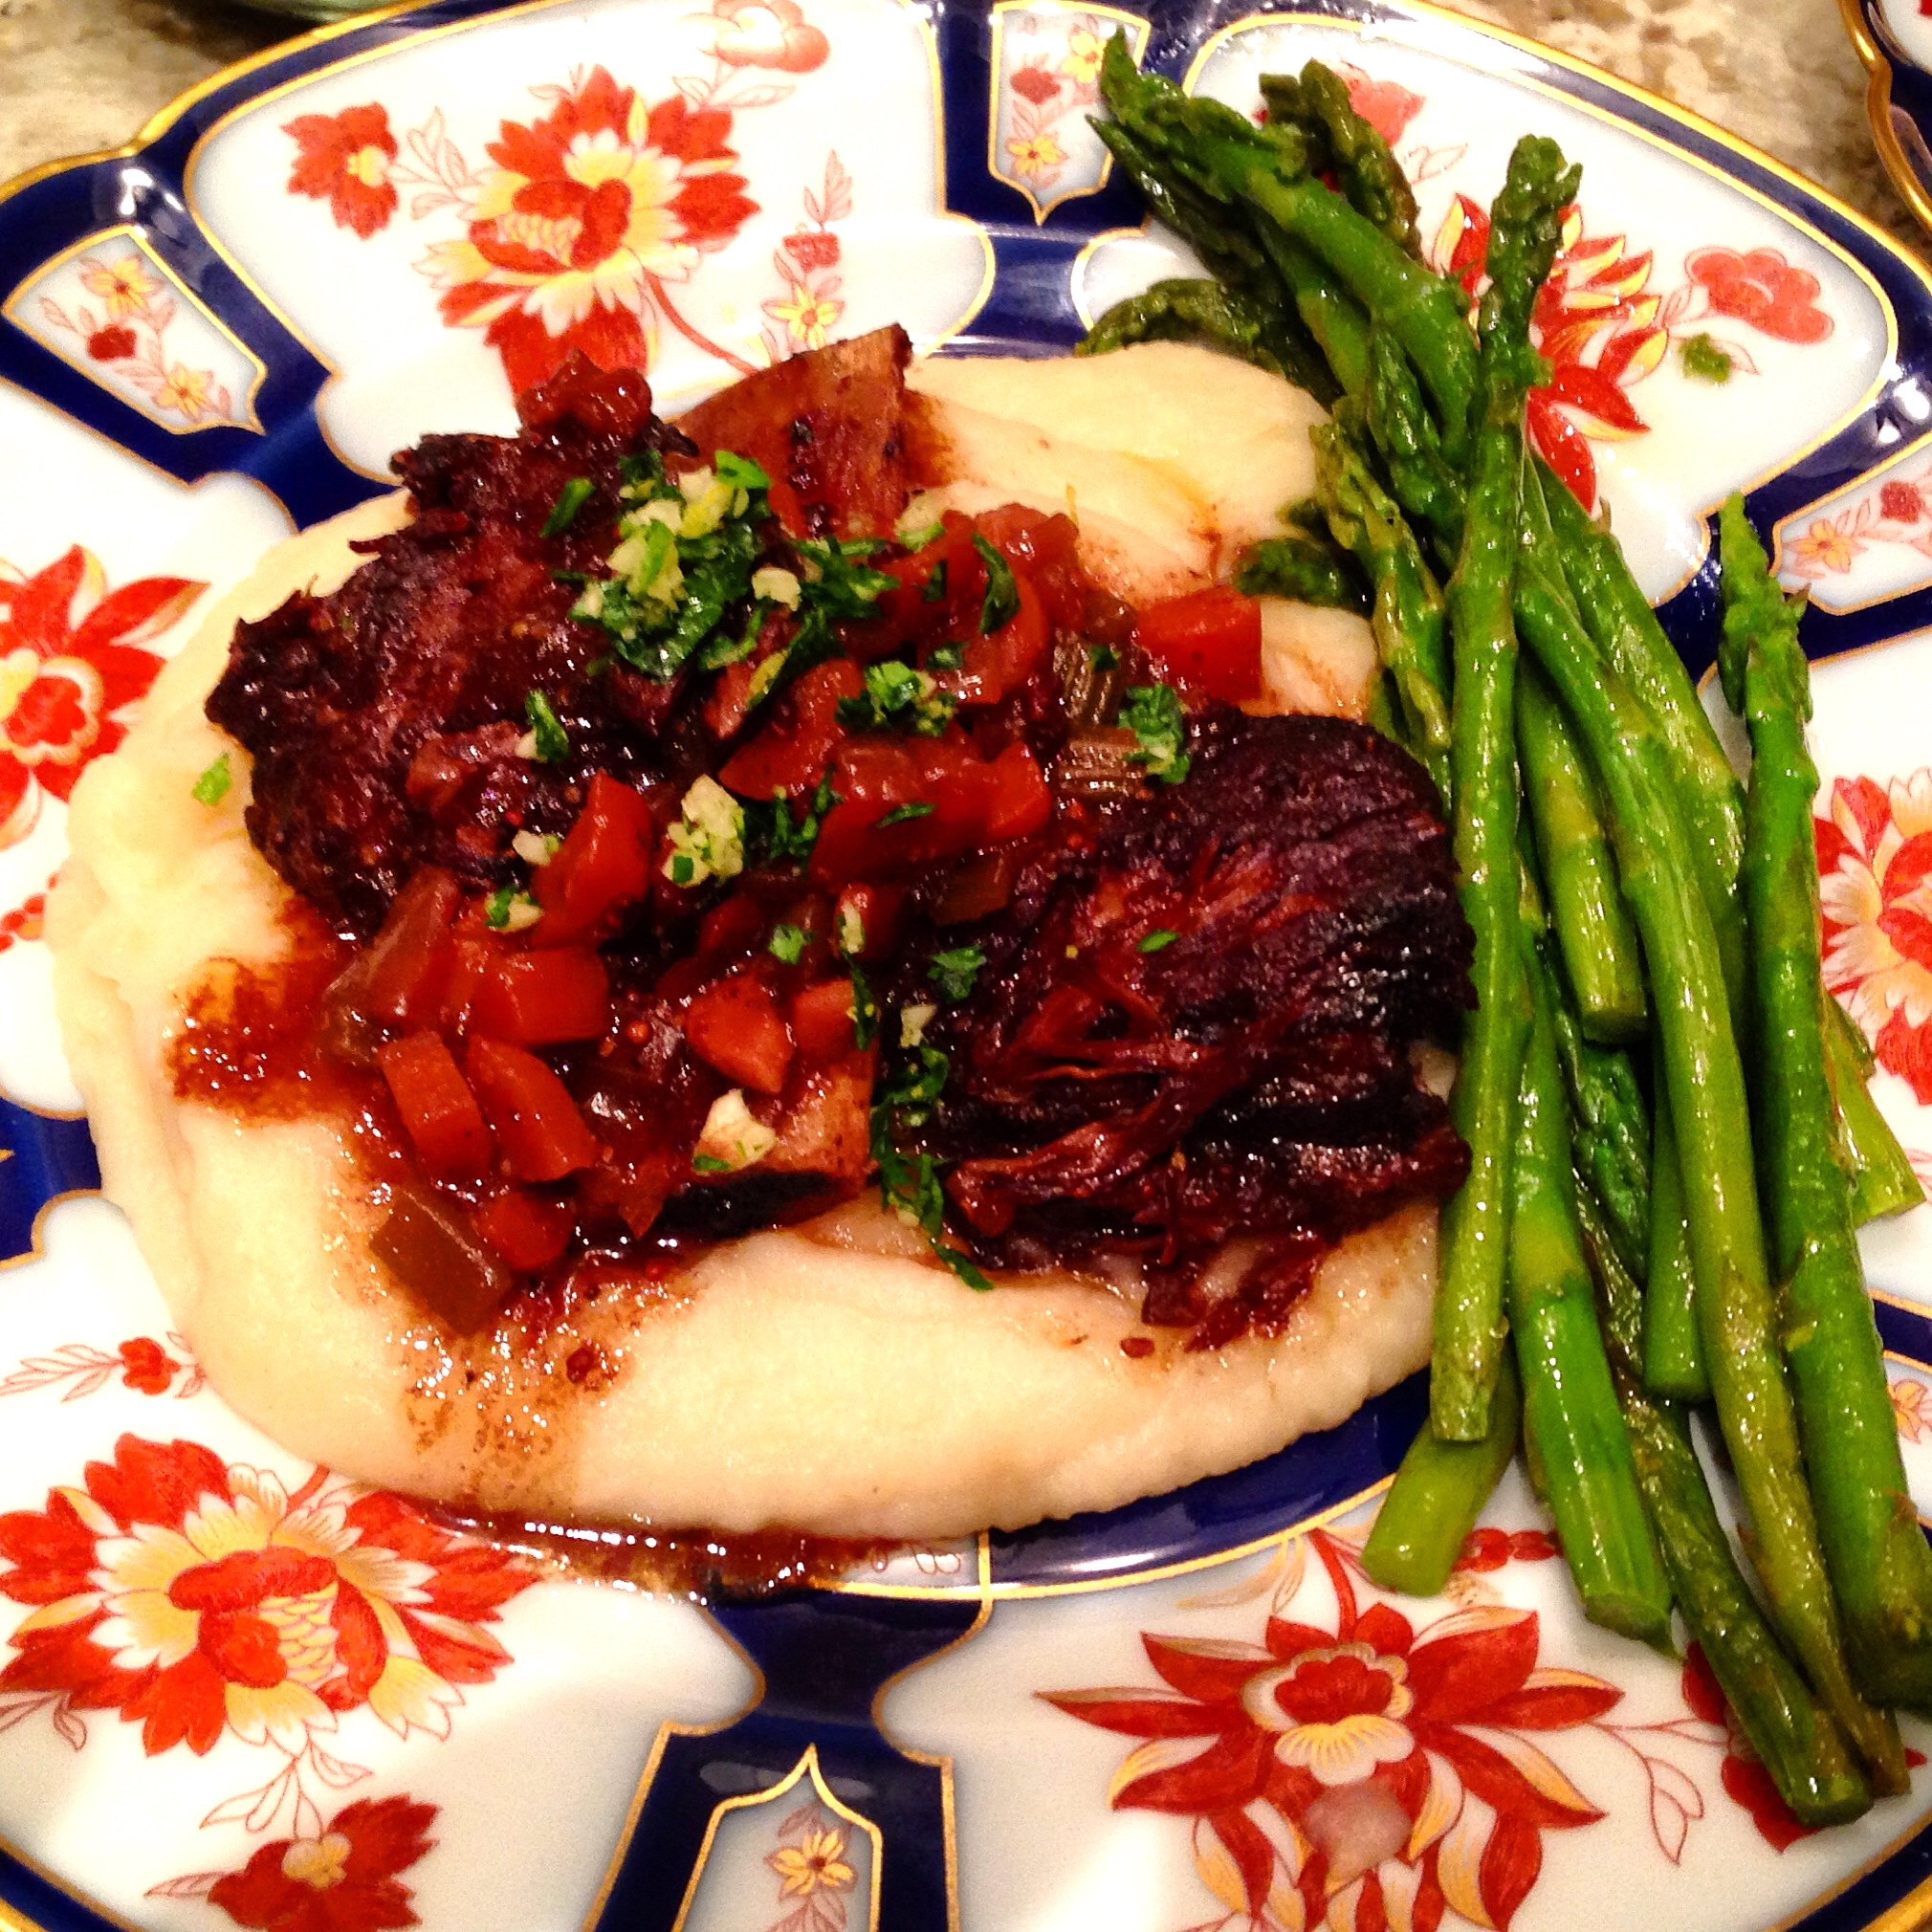 Slow-braised Korean style beef short ribs with soy-ginger-sherry sauce and vegetables, on celeriac puree, asparagus